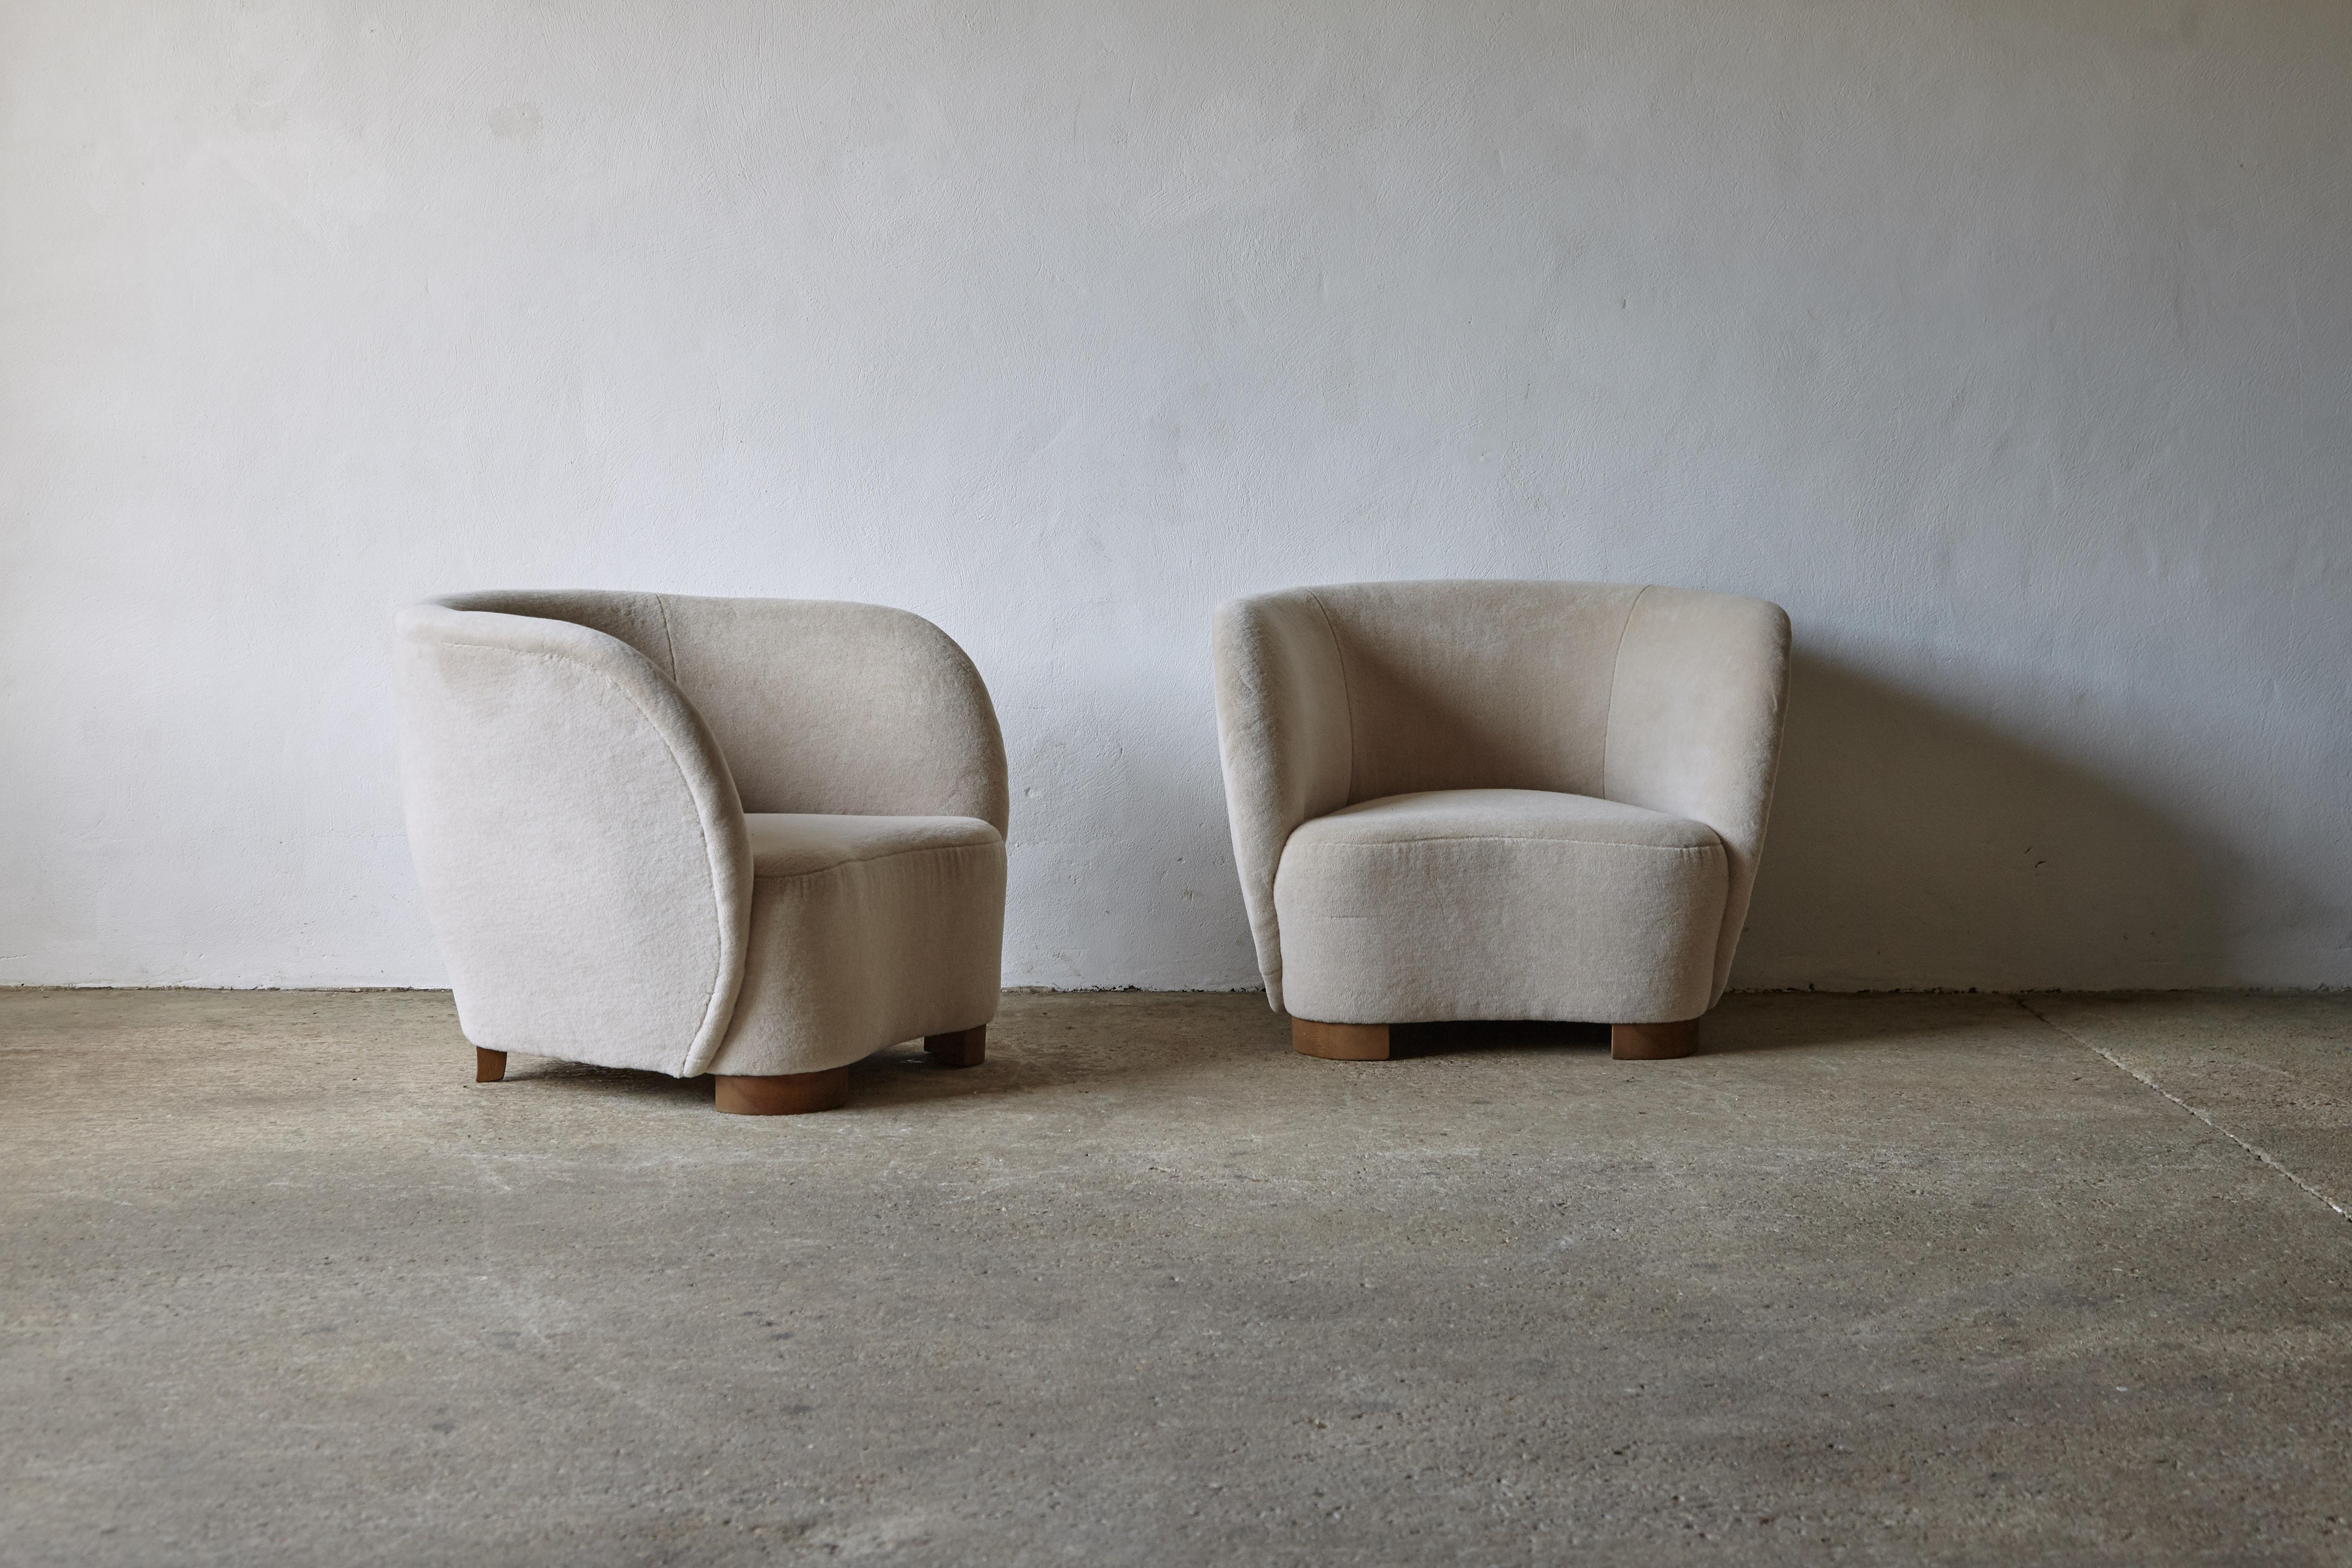 A beautiful pair of armchairs, in the style of Flemming Lassen / Viggo Boesen, newly upholstered in a premium ivory / stone pure Alpaca fabric. Priced and sold as a pair together. Fast shipping worldwide.



